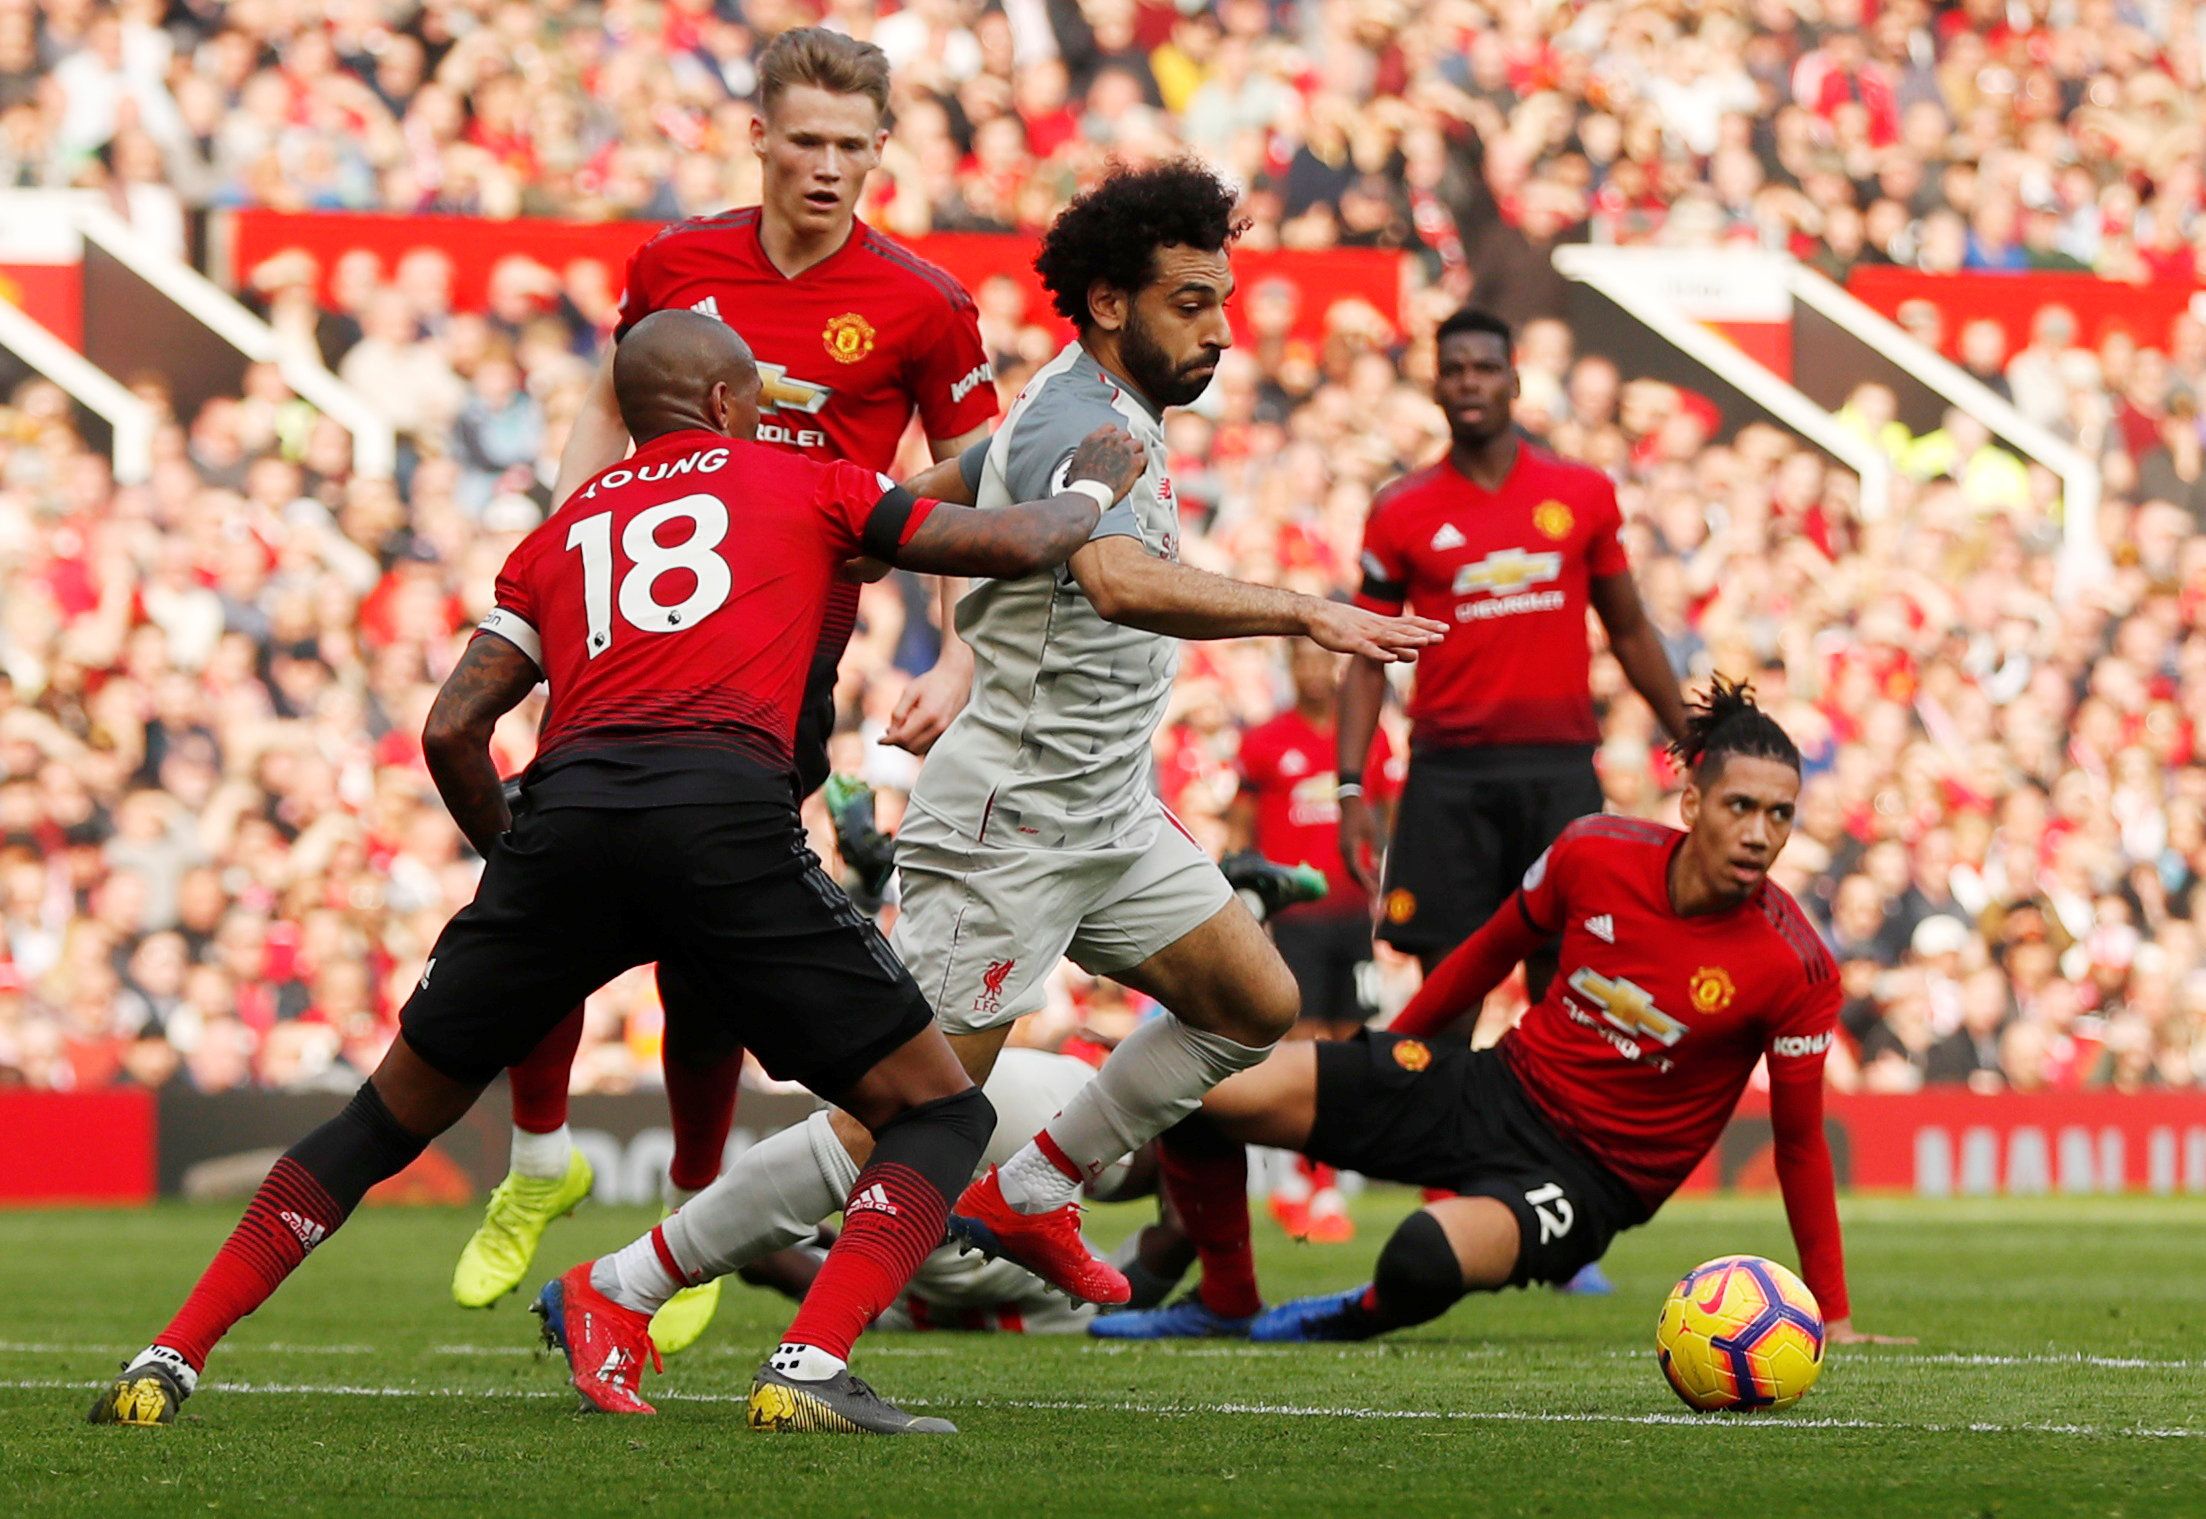 Soccer Football - Premier League - Manchester United v Liverpool - Old Trafford, Manchester, Britain - February 24, 2019  Liverpool's Mohamed Salah in action with Manchester United's Ashley Young   Action Images via Reuters/Lee Smith  EDITORIAL USE ONLY. No use with unauthorized audio, video, data, fixture lists, club/league logos or 